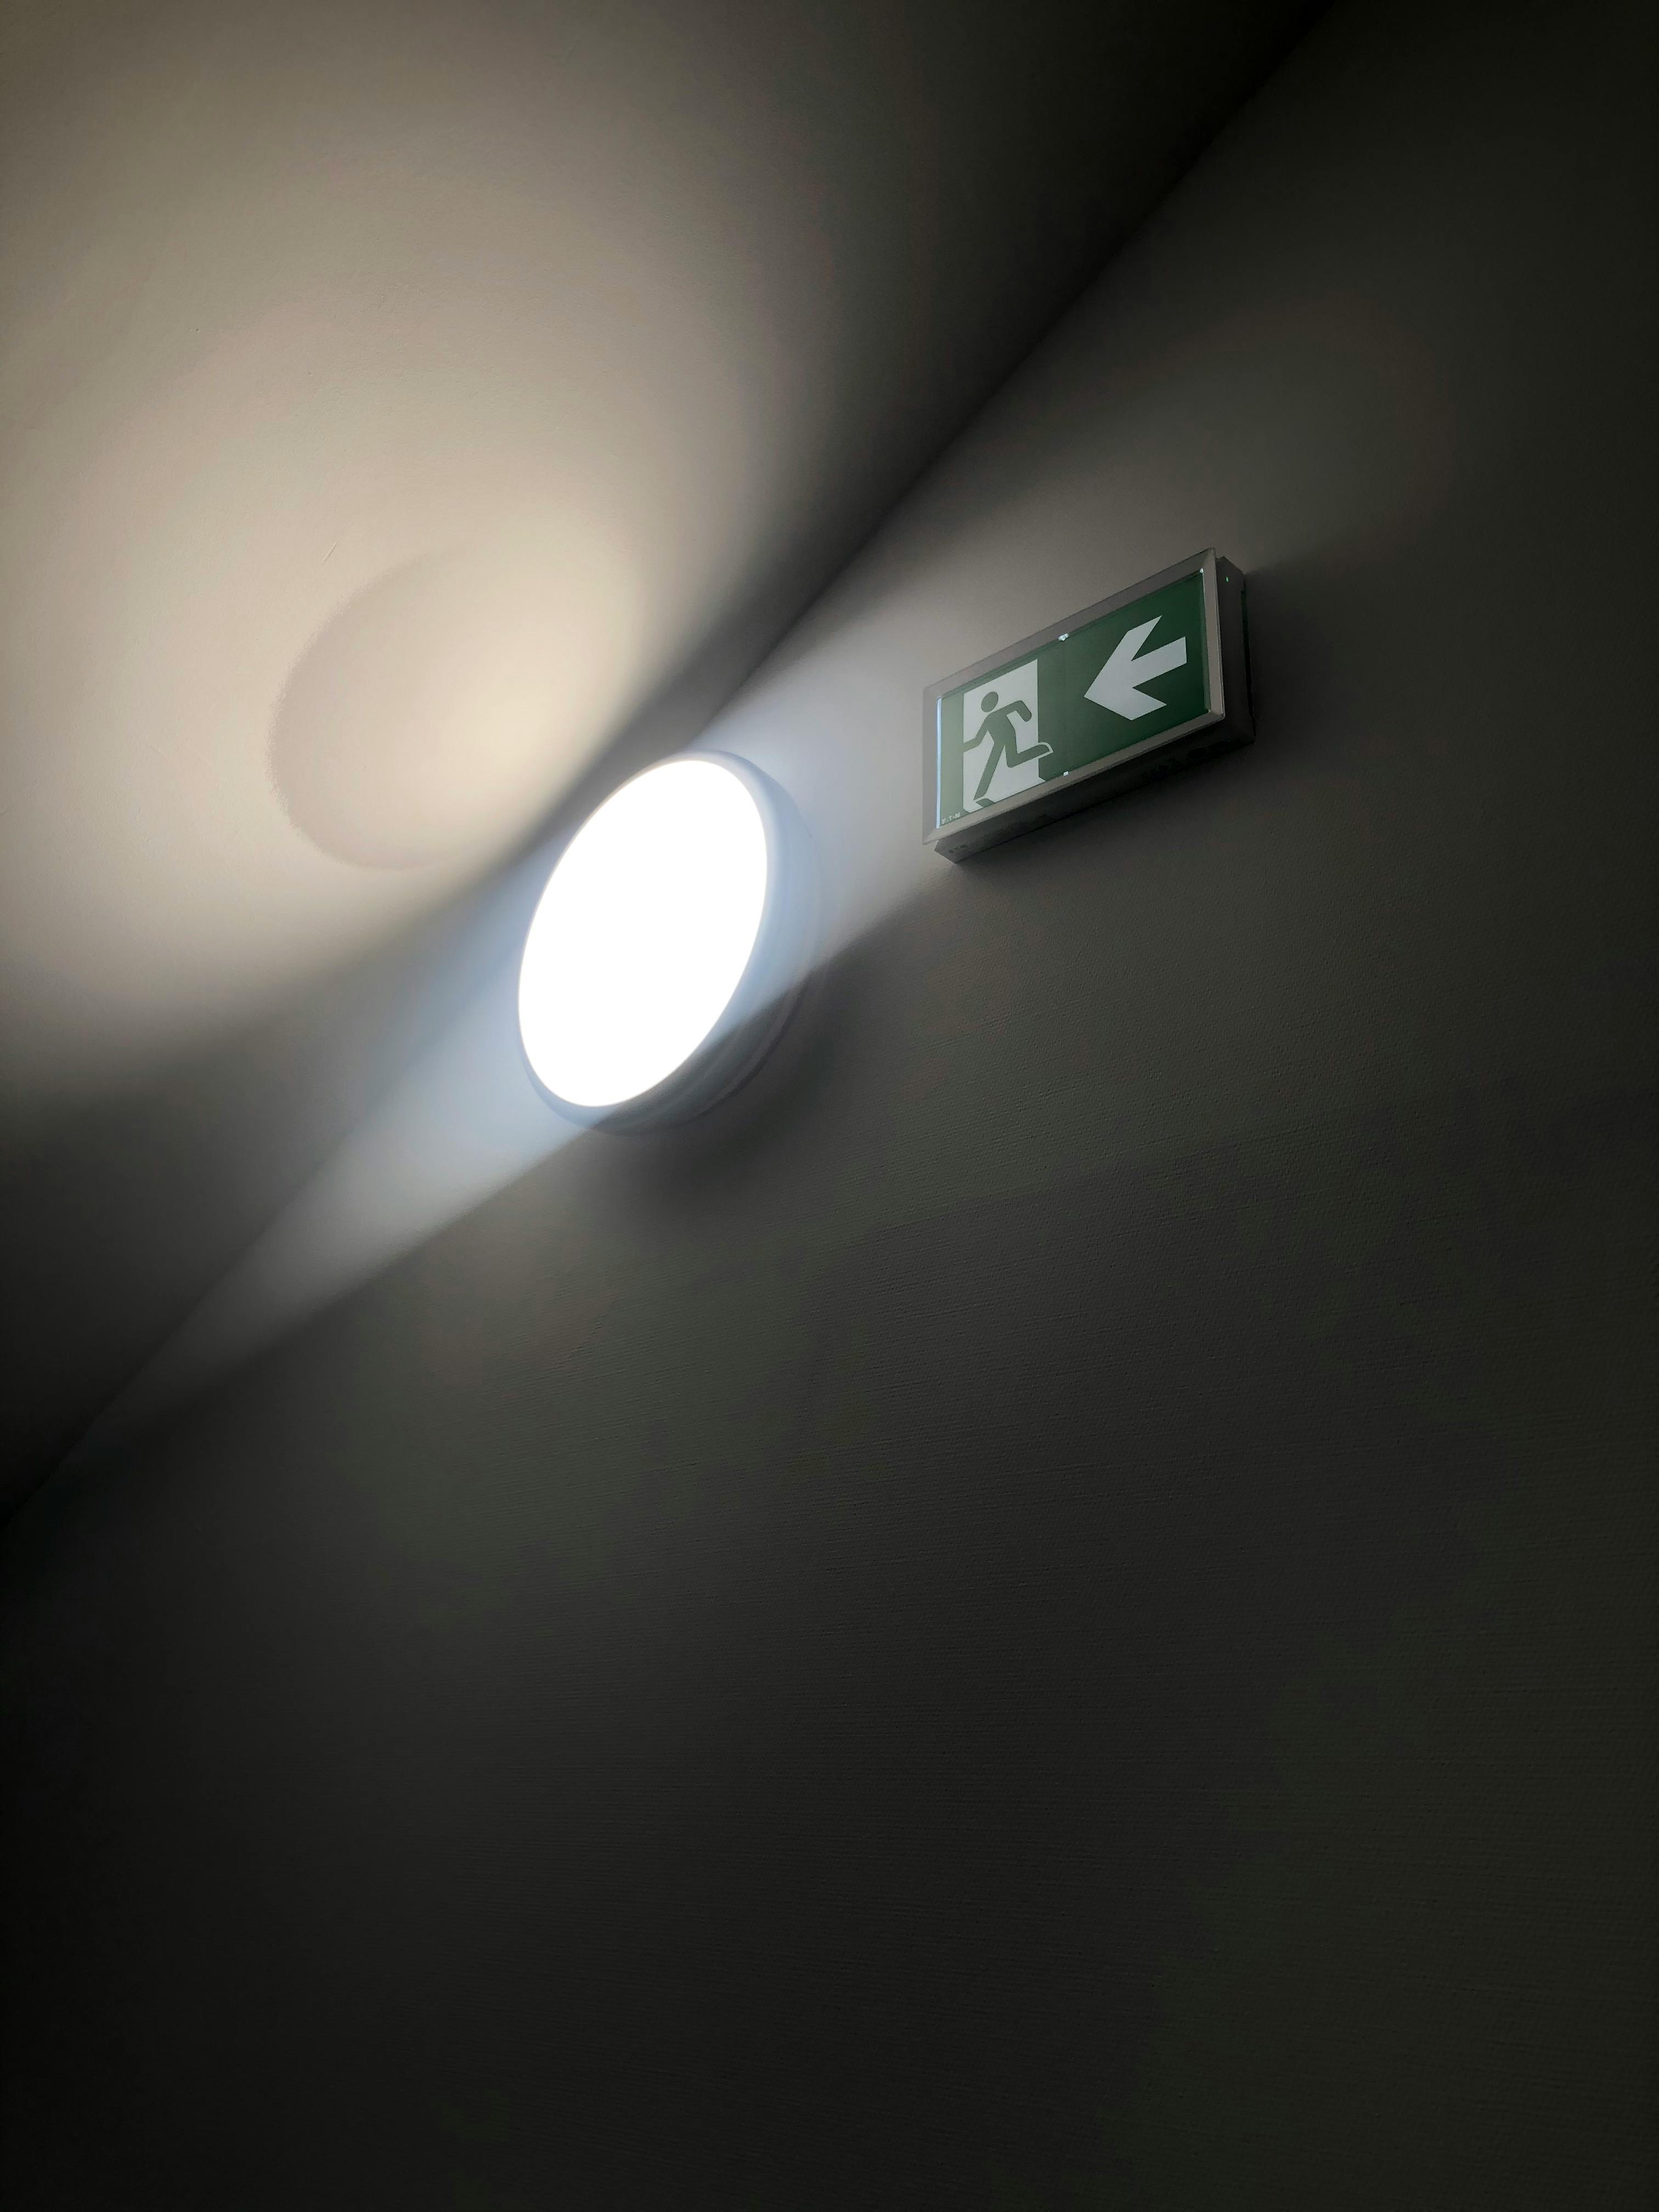 Fire Exit emergency lighting